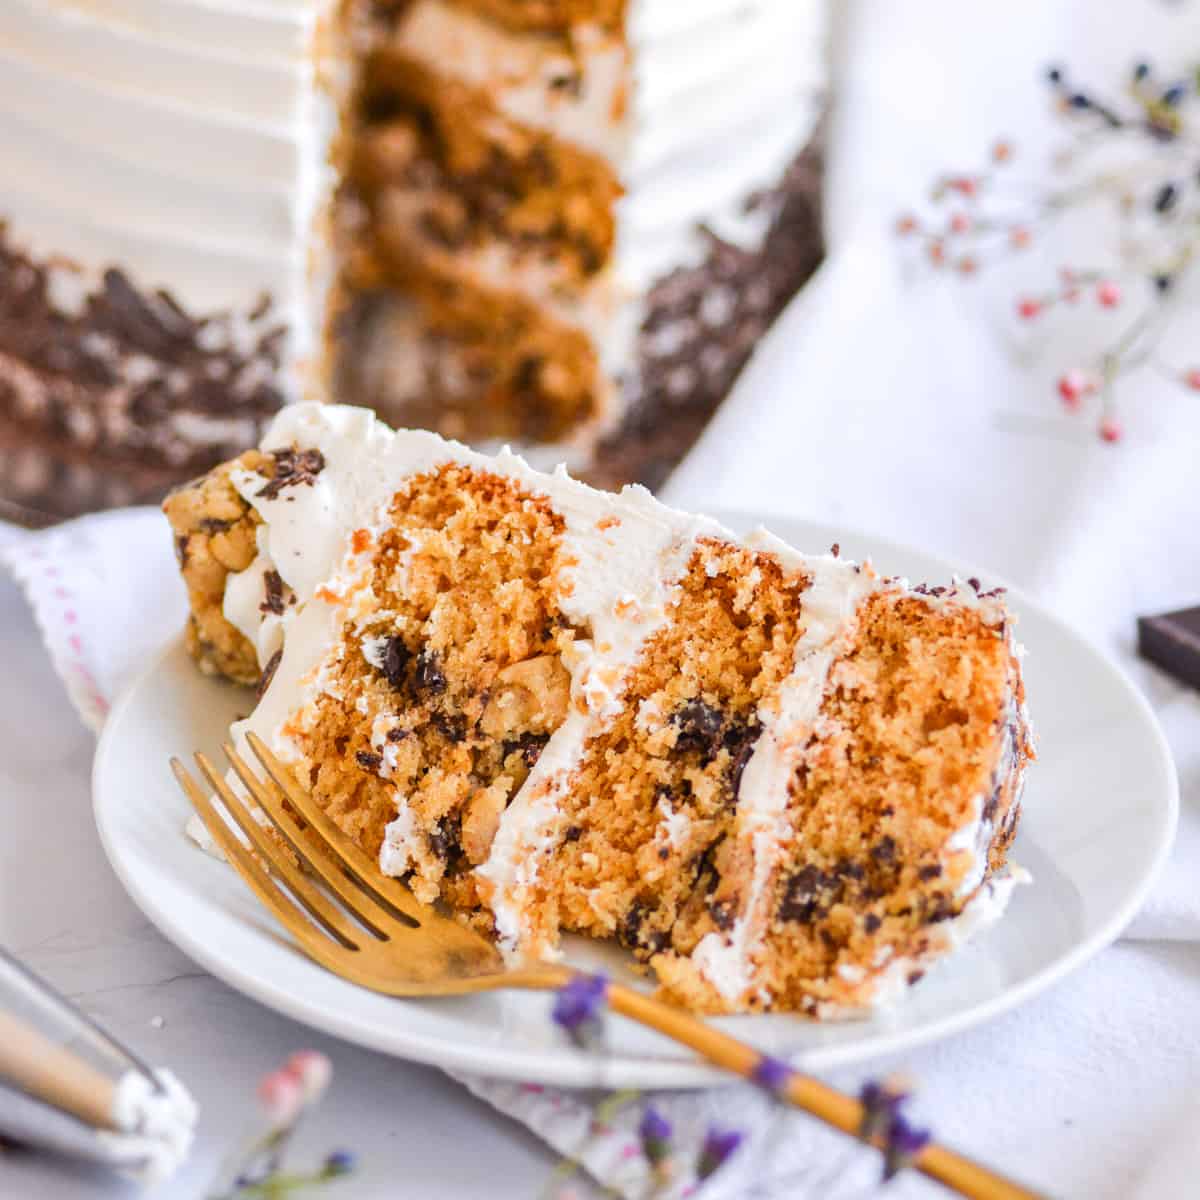 https://earthly-provisions.com/wp-content/uploads/2021/03/Vegan-Cookie-Dough-Cake-5.jpg